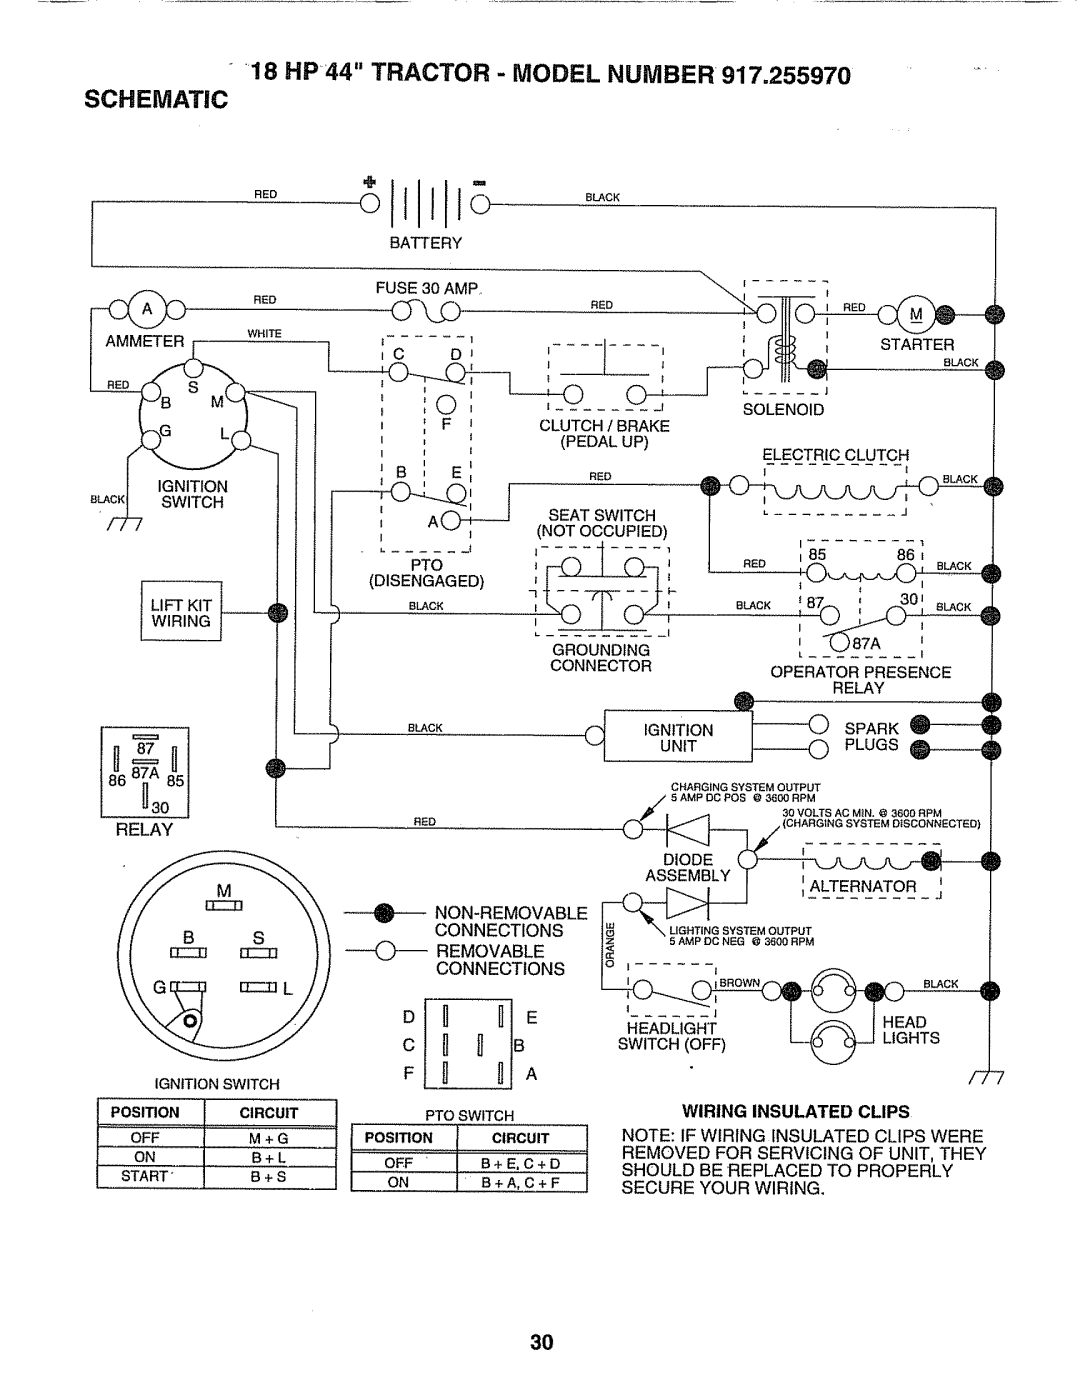 Sears 917.25597 Moo,P2__--- -_--_, UaZA, 18 HP44 TRACTOR - MODEL NUMBER SCHEMATIC, oilllllom, As_A_Te_,Tor, PUUGS0____41 